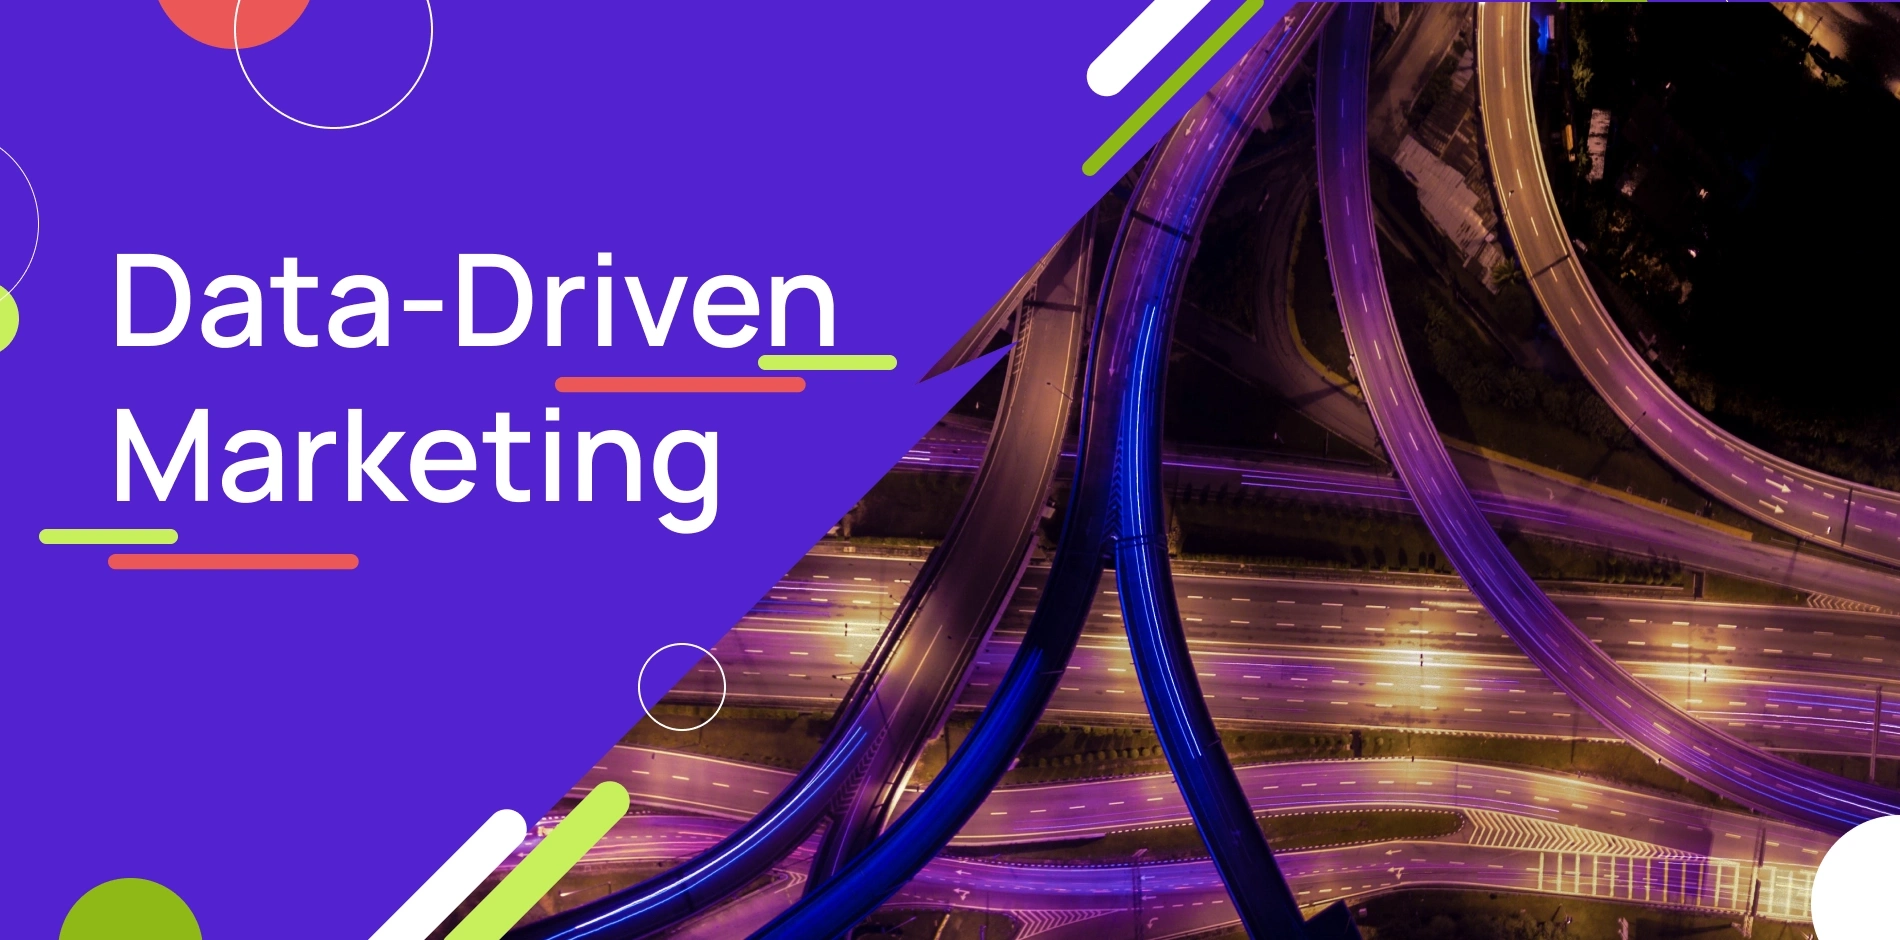 Graphic with a photo of highway with purple background and the words "Data-Driven Marketing""